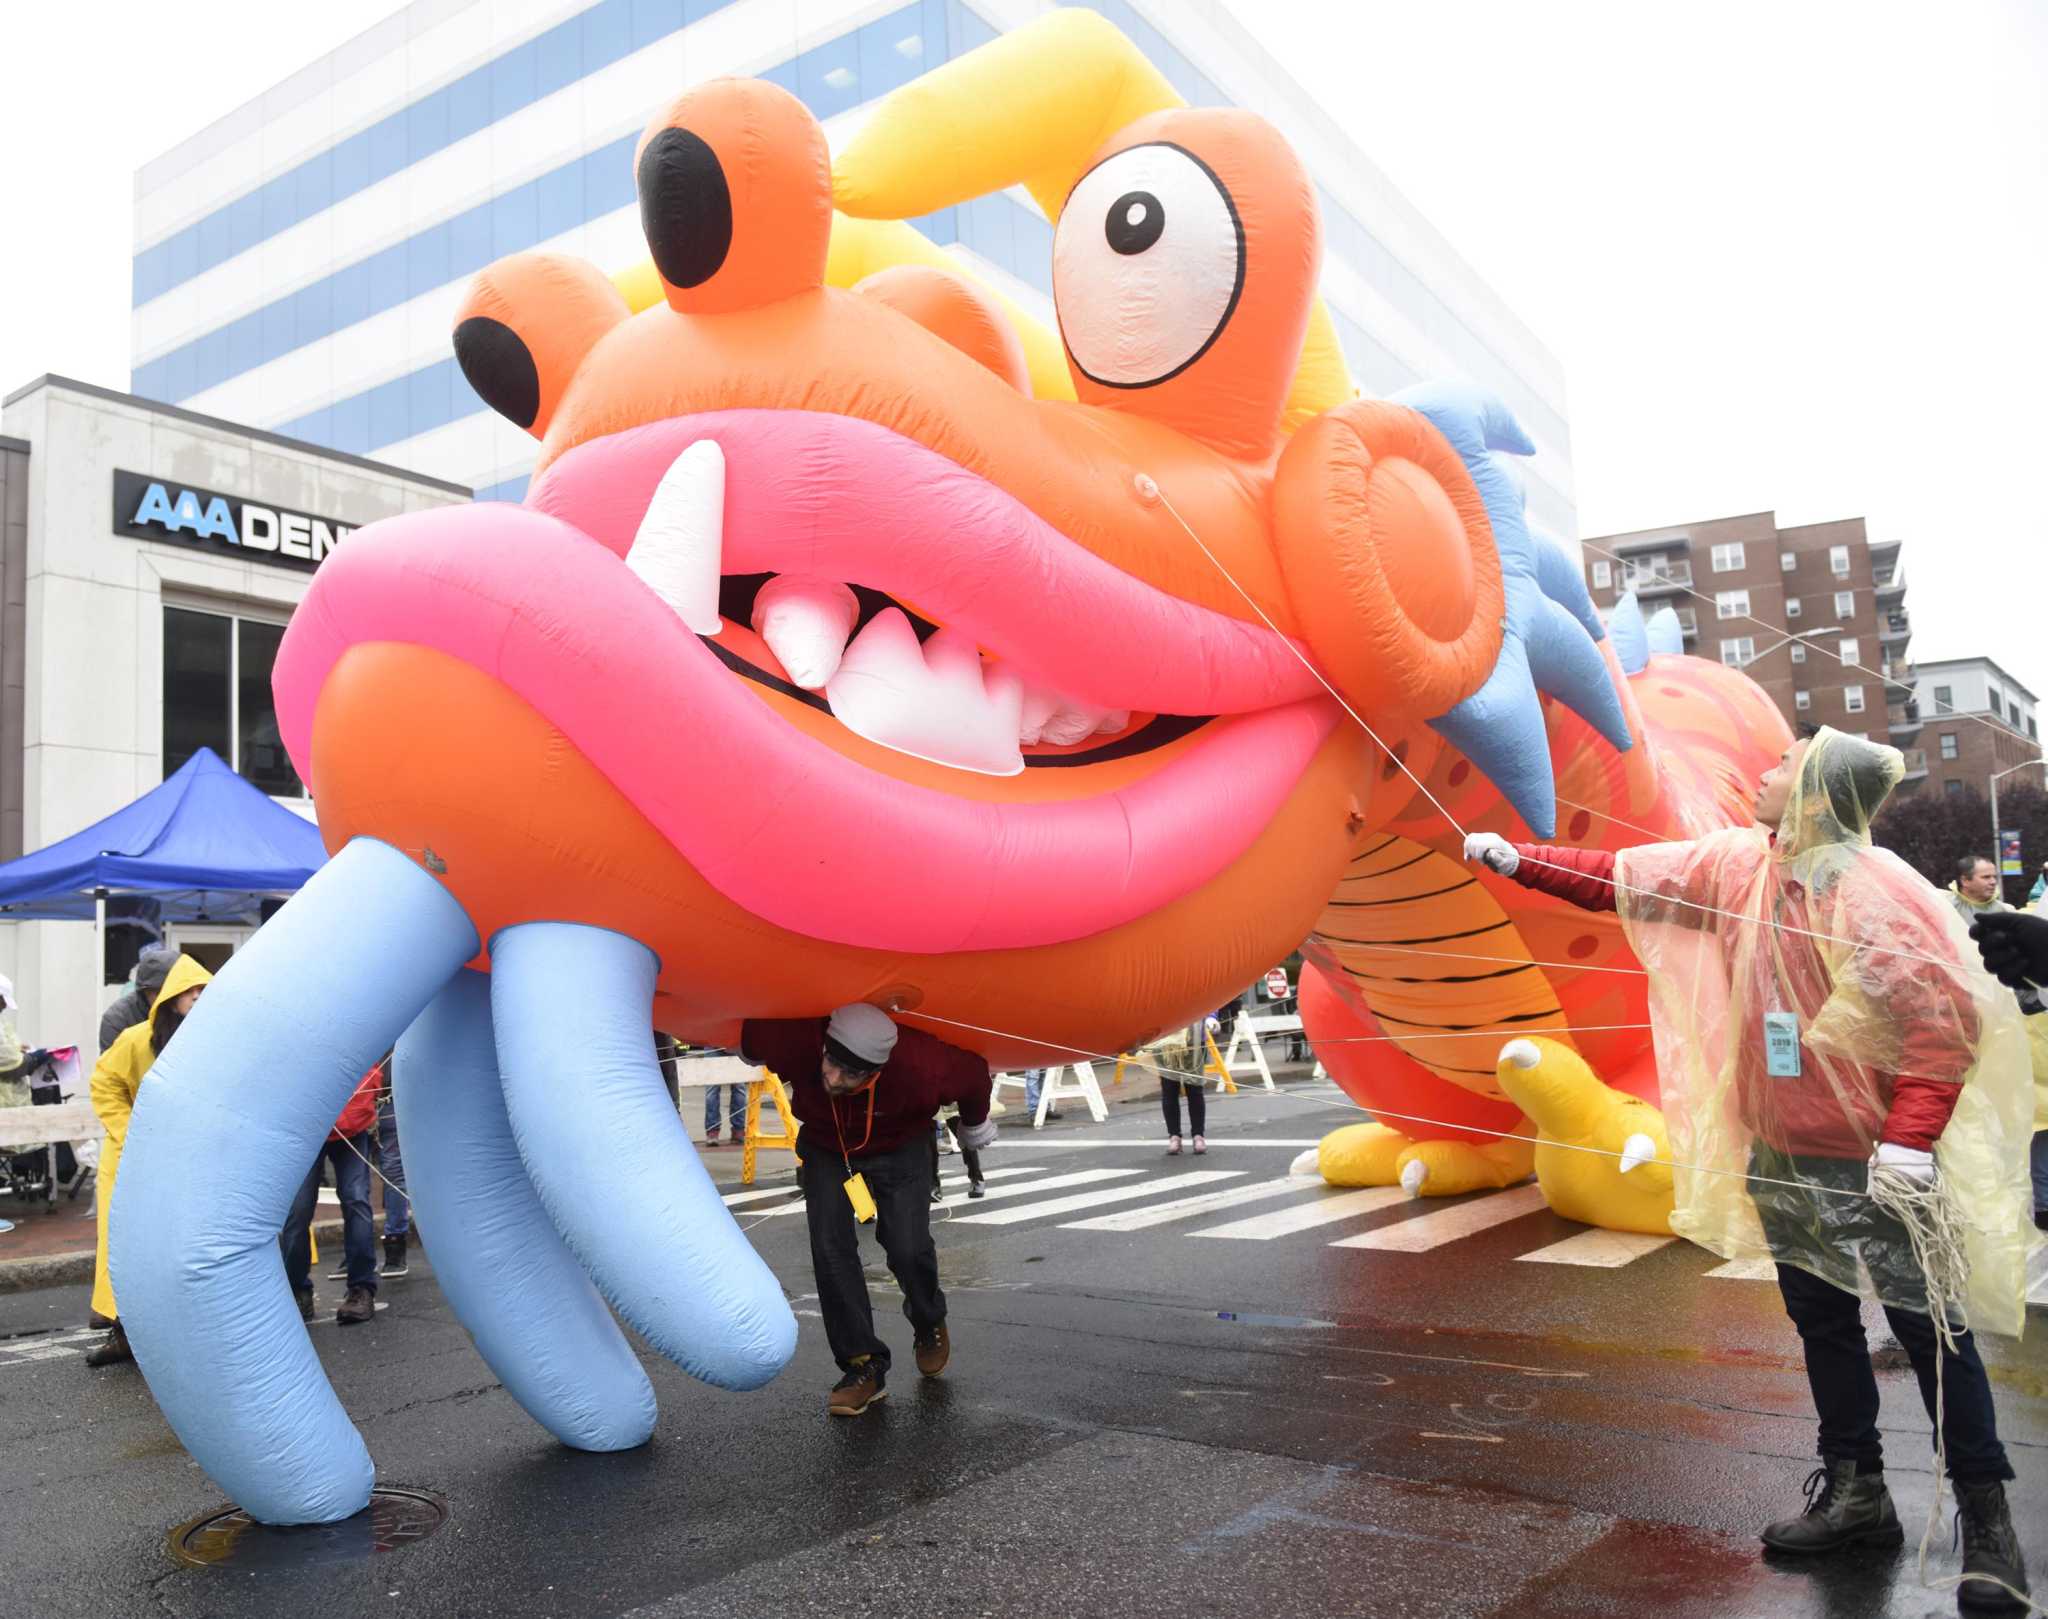 Stamford Thanksgiving parade returns for first time since 2019